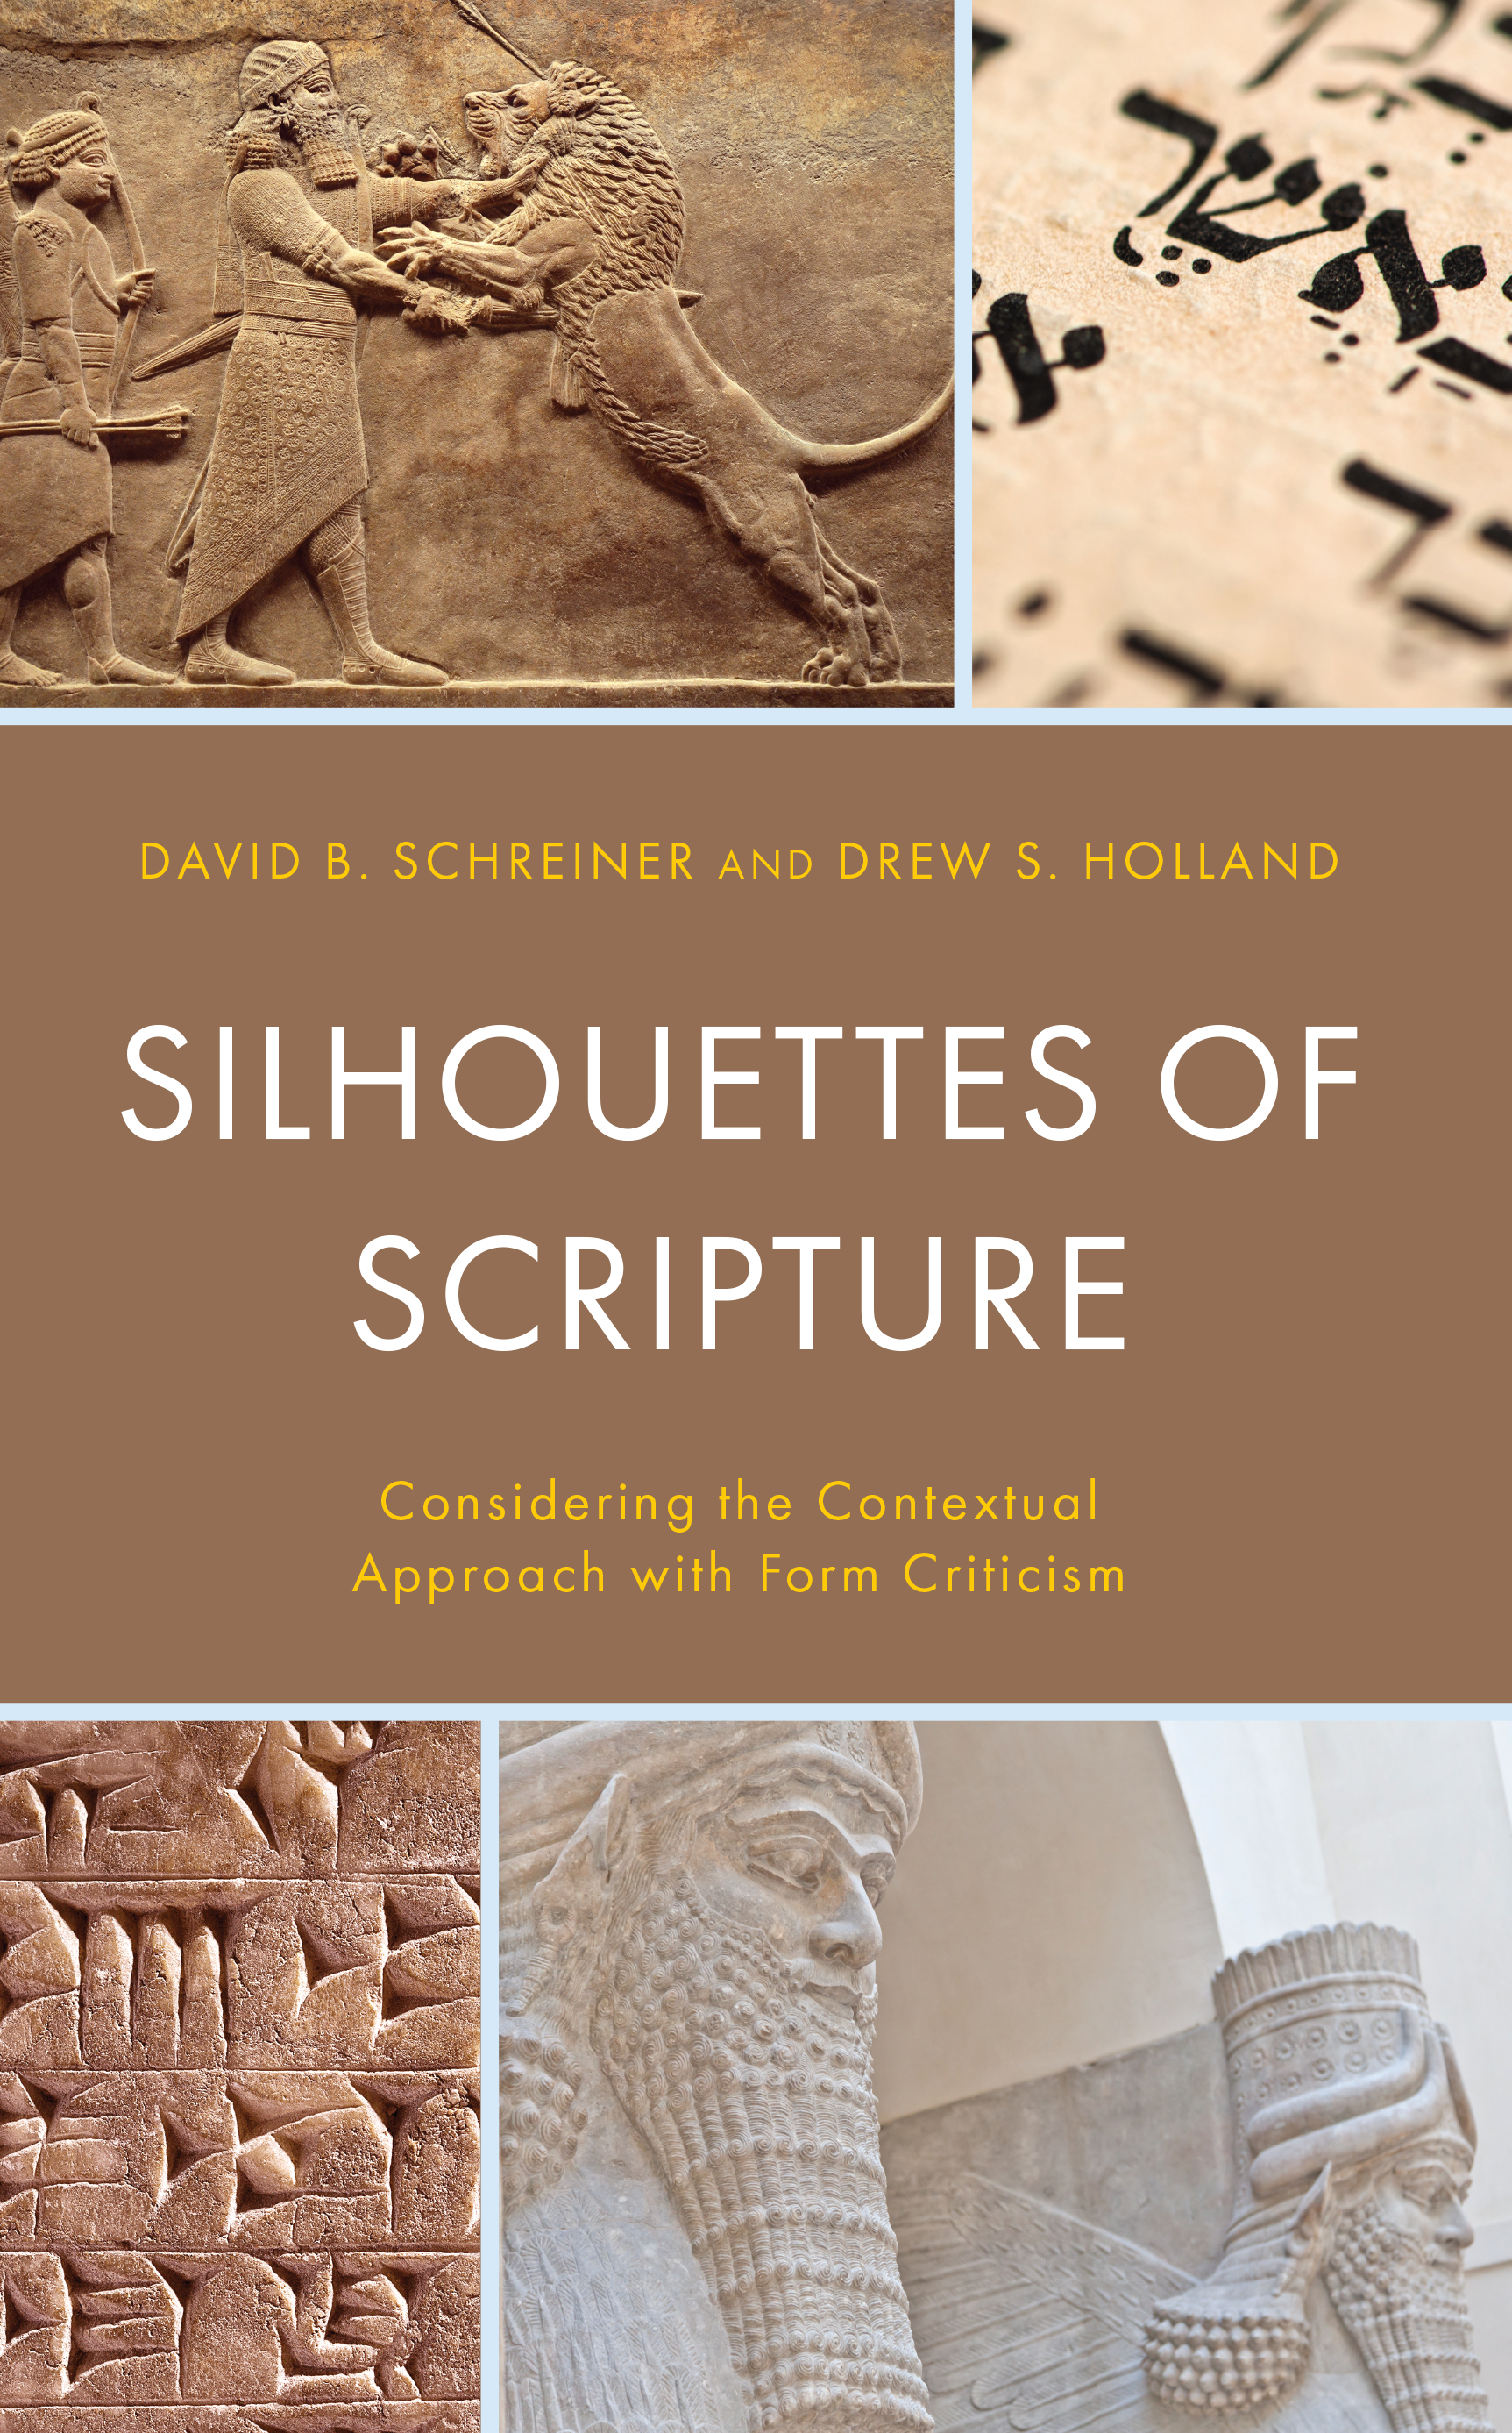 Silhouettes of Scripture: Considering the Contextual Approach with Form Criticism